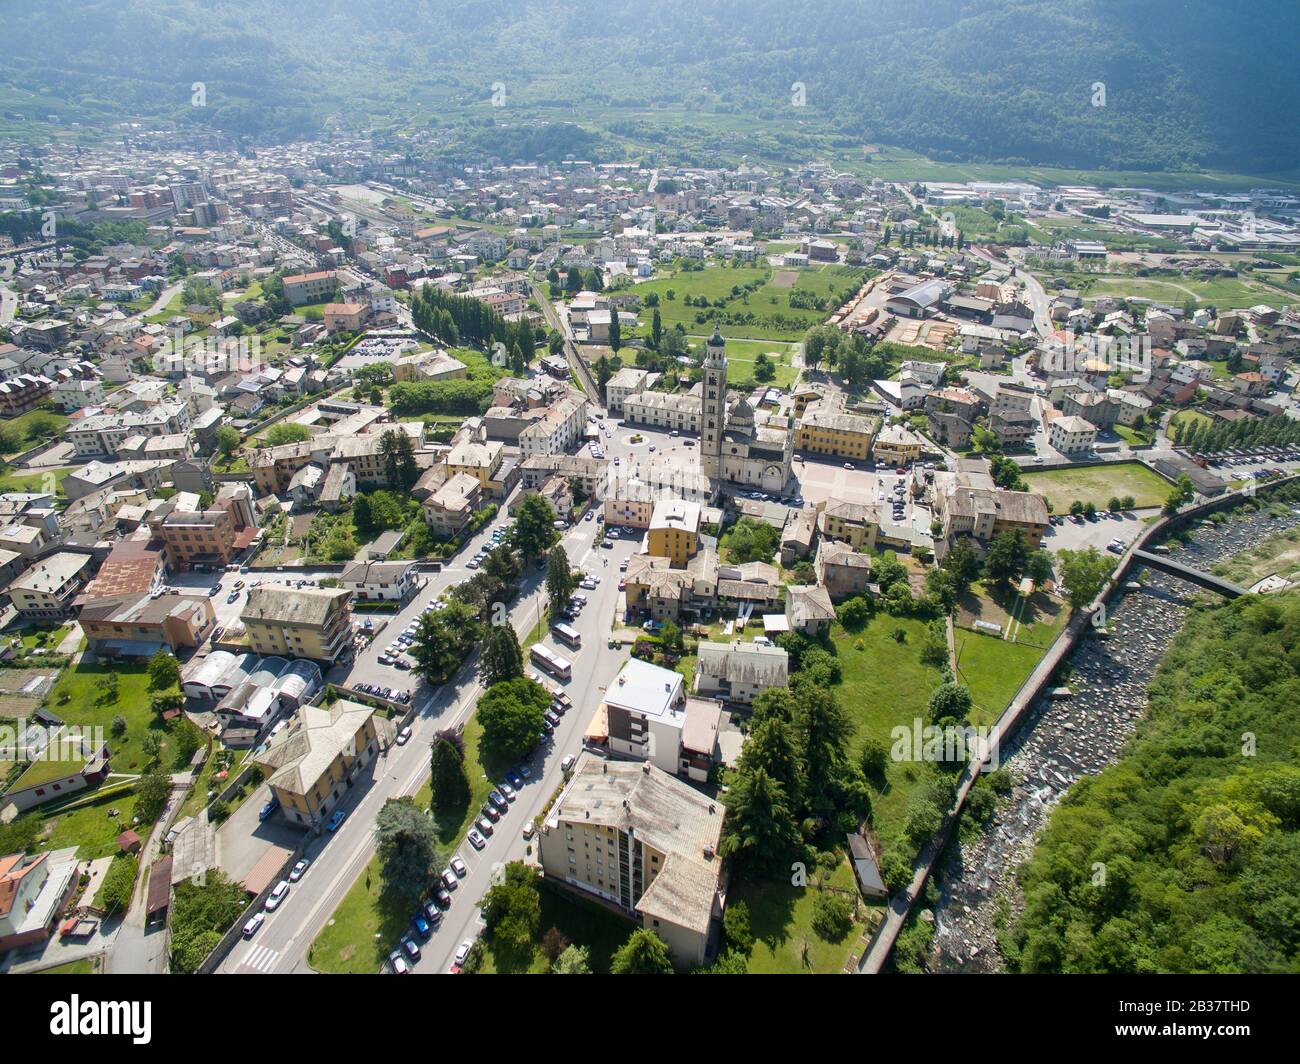 Tirano - Valtellina (IT) - View of the Basilica from above Stock Photo